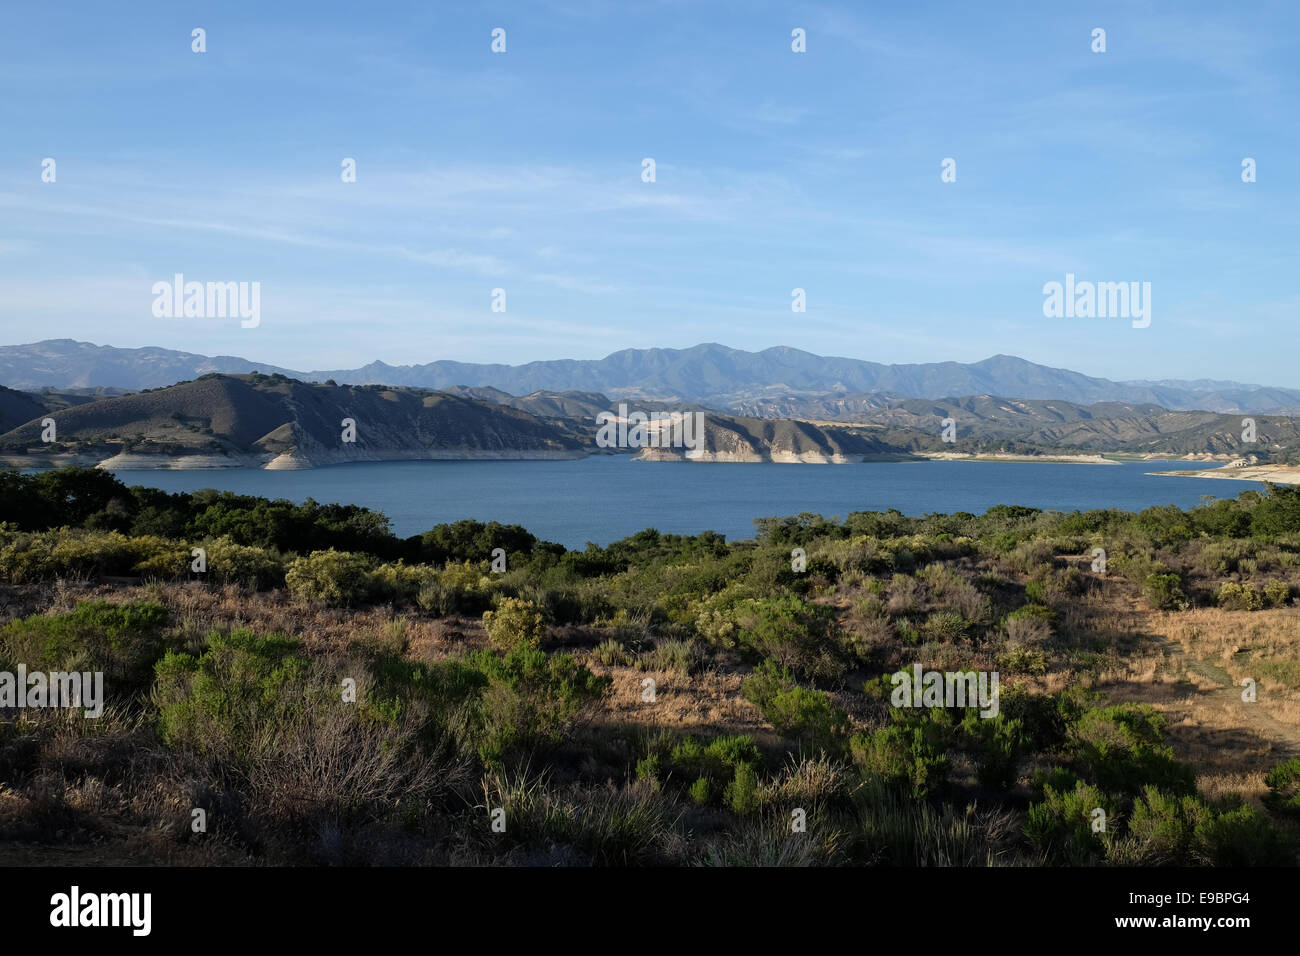 Californian reservoir showing water levels are low Stock Photo